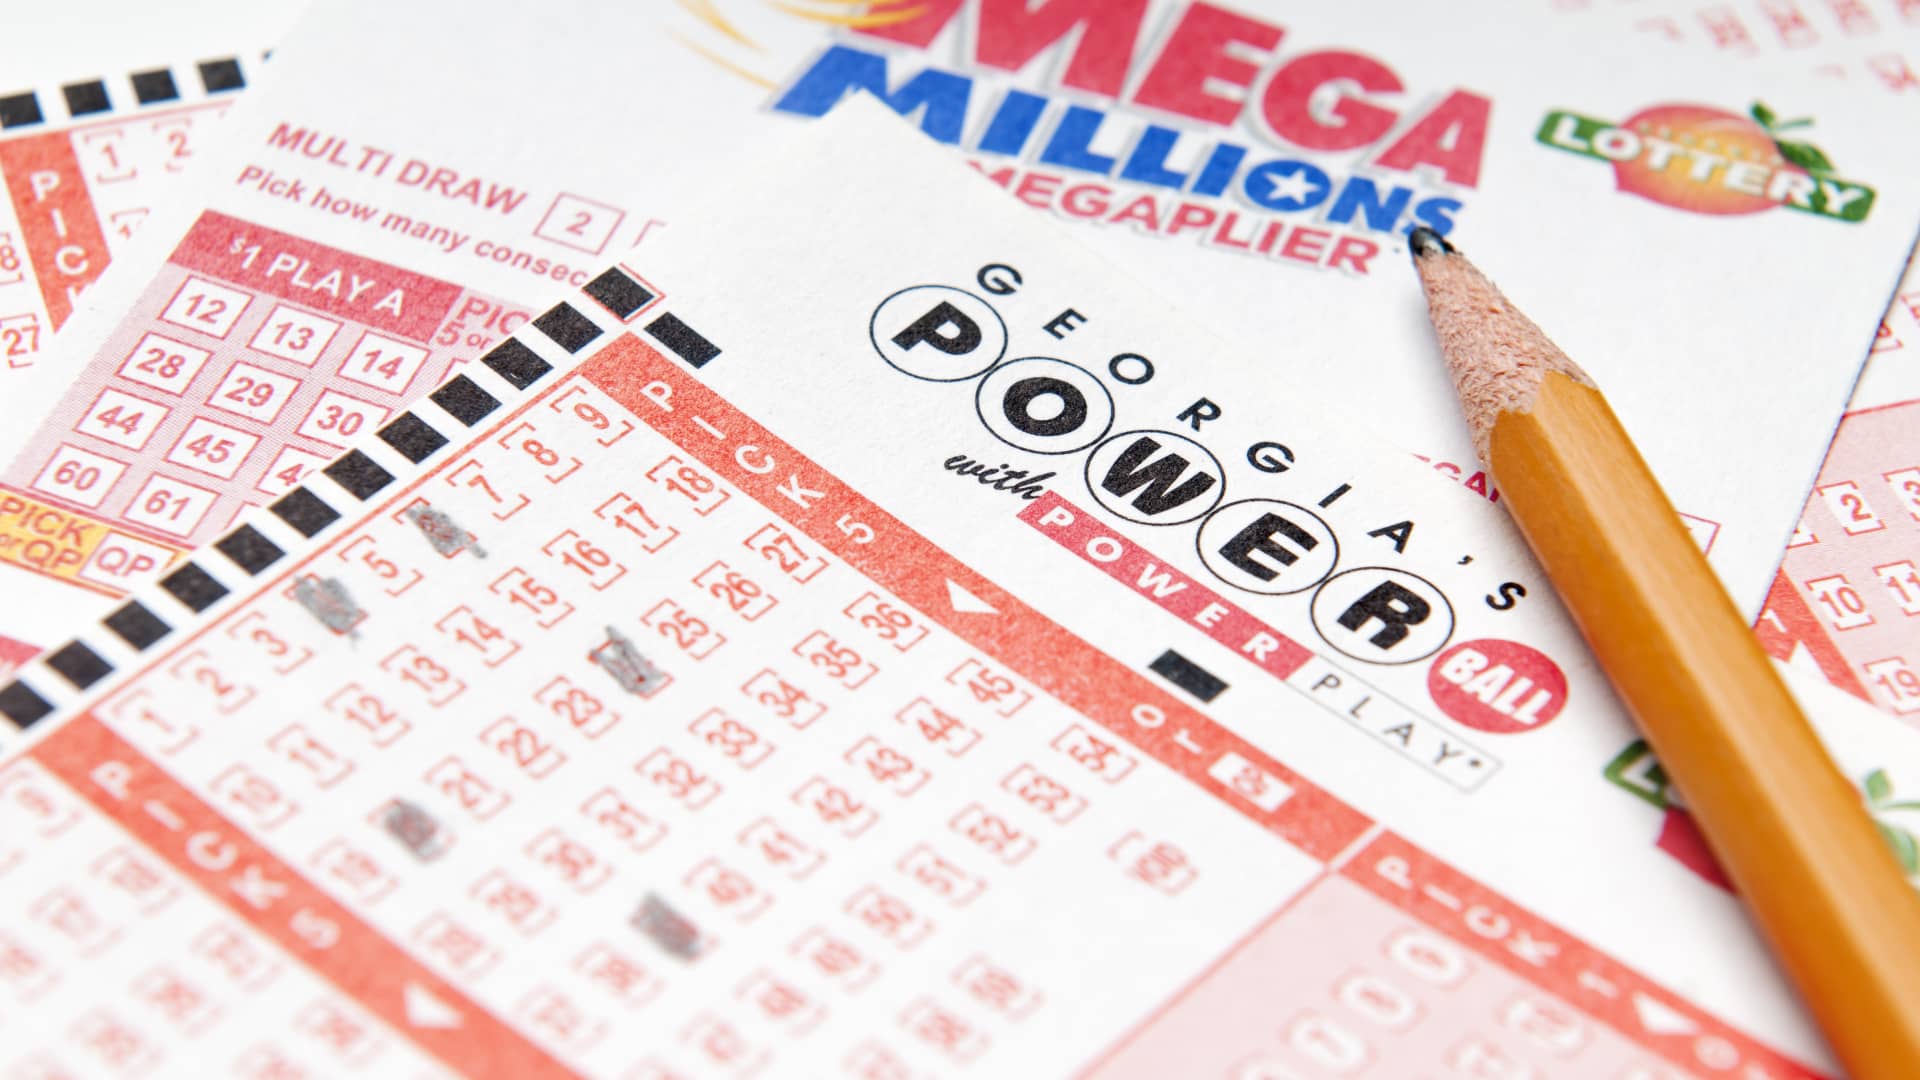 Powerball and Mega Millions jackpots are both above 0 million